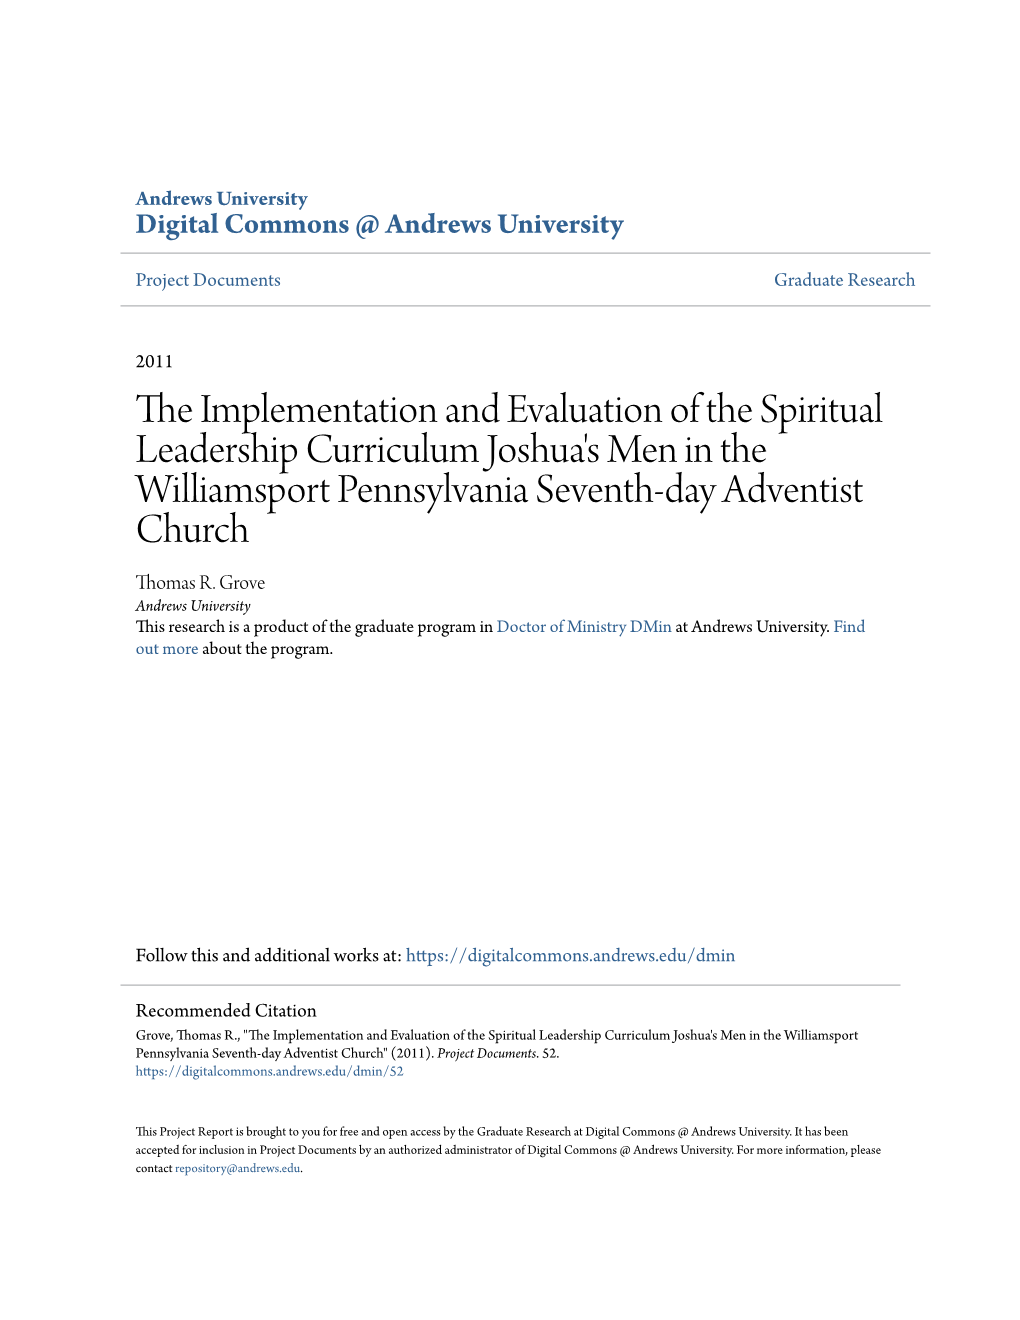 The Implementation and Evaluation of the Spiritual Leadership Curriculum Joshua’S Men in the Williamsport Pennsylvania Seventh-Day Adventist Church